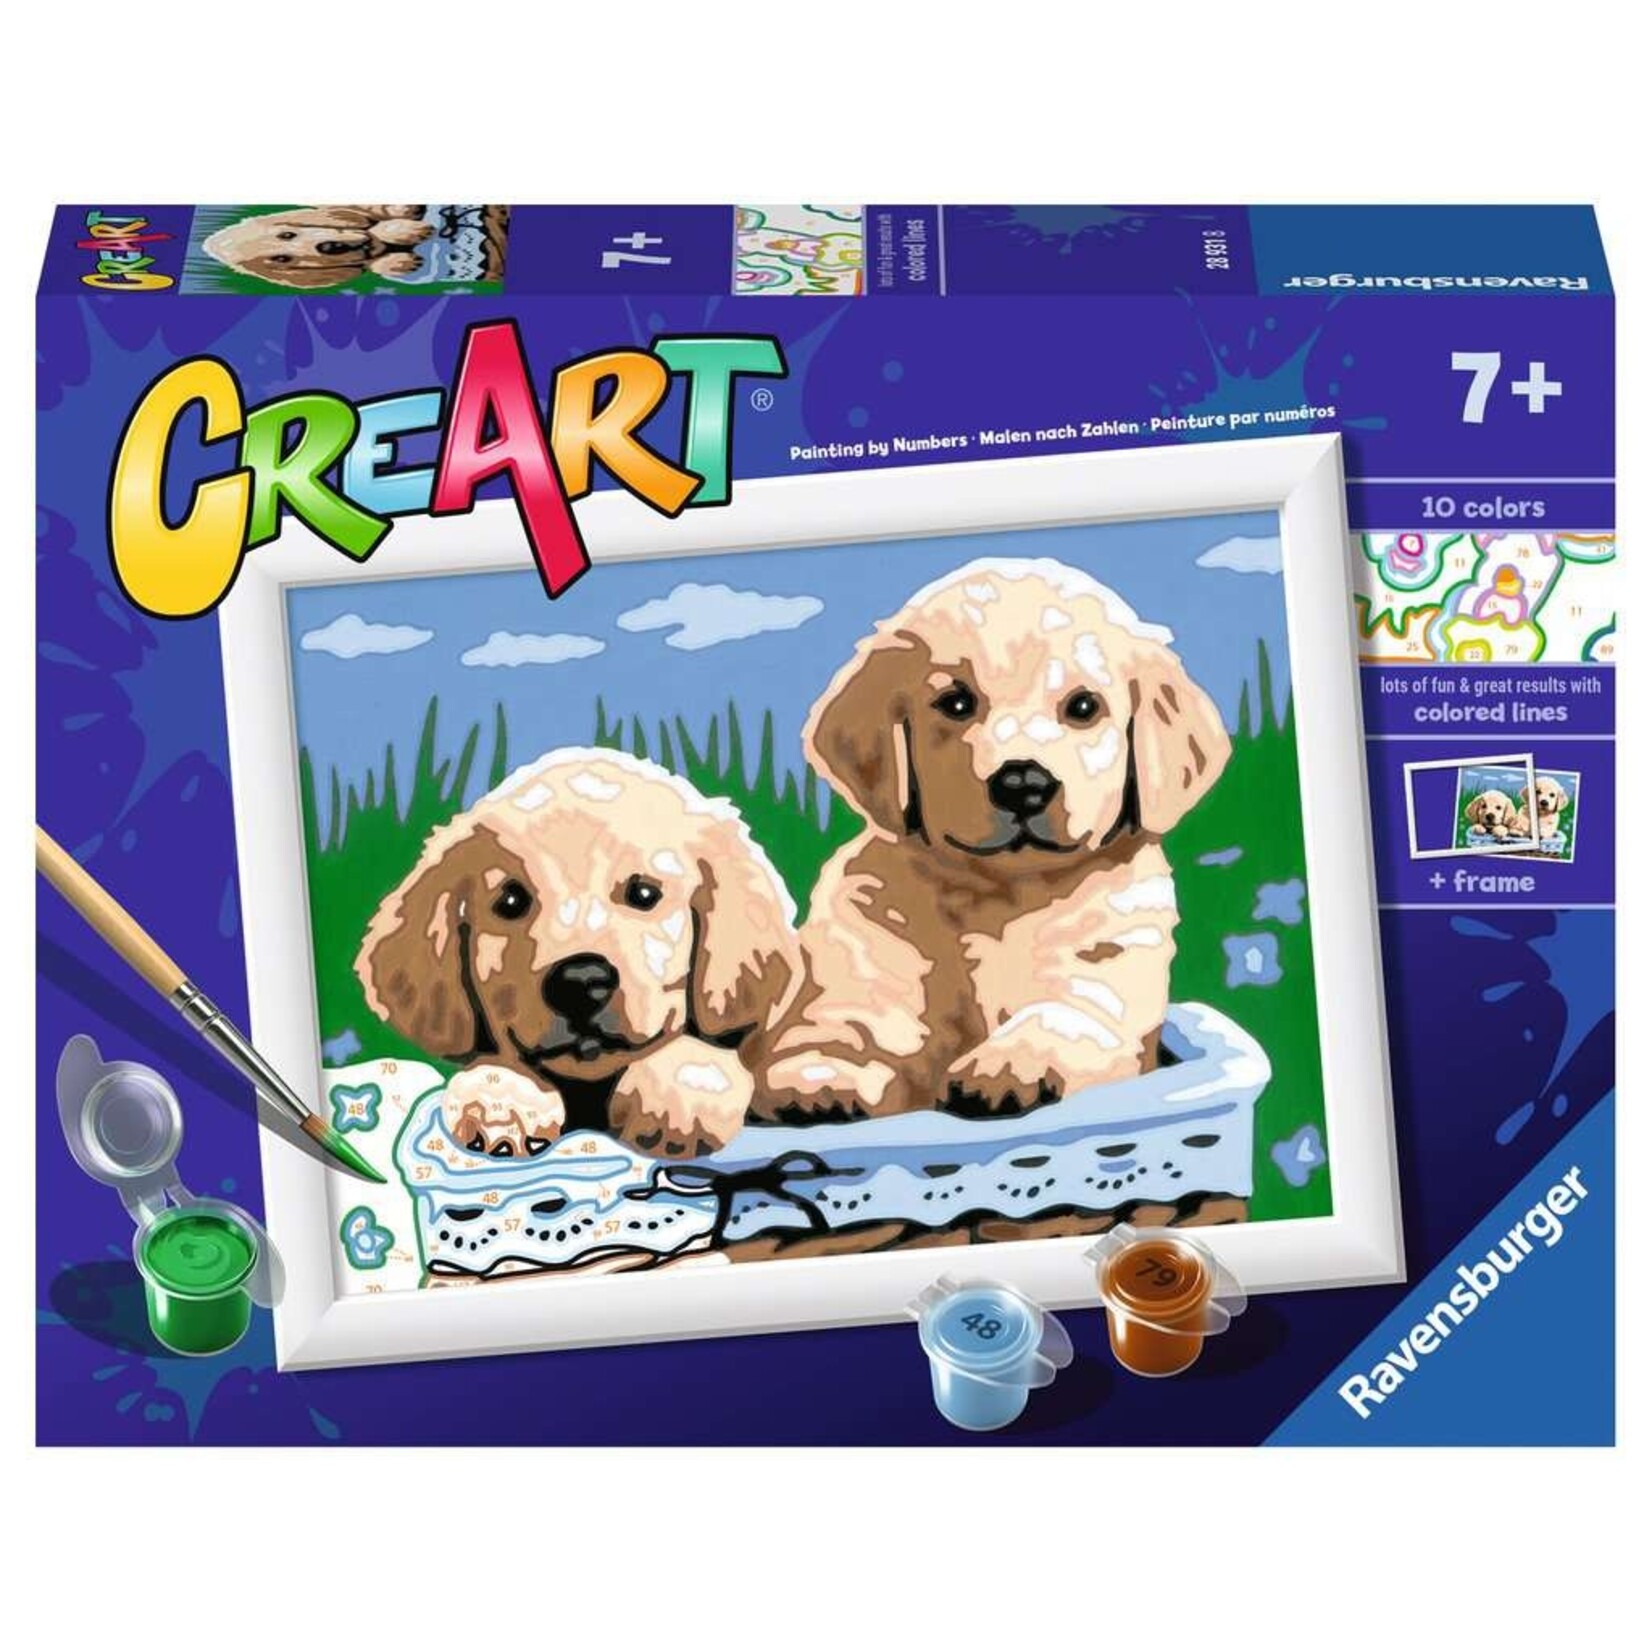 Cute Puppies CreArt Paint By Number Kids Set